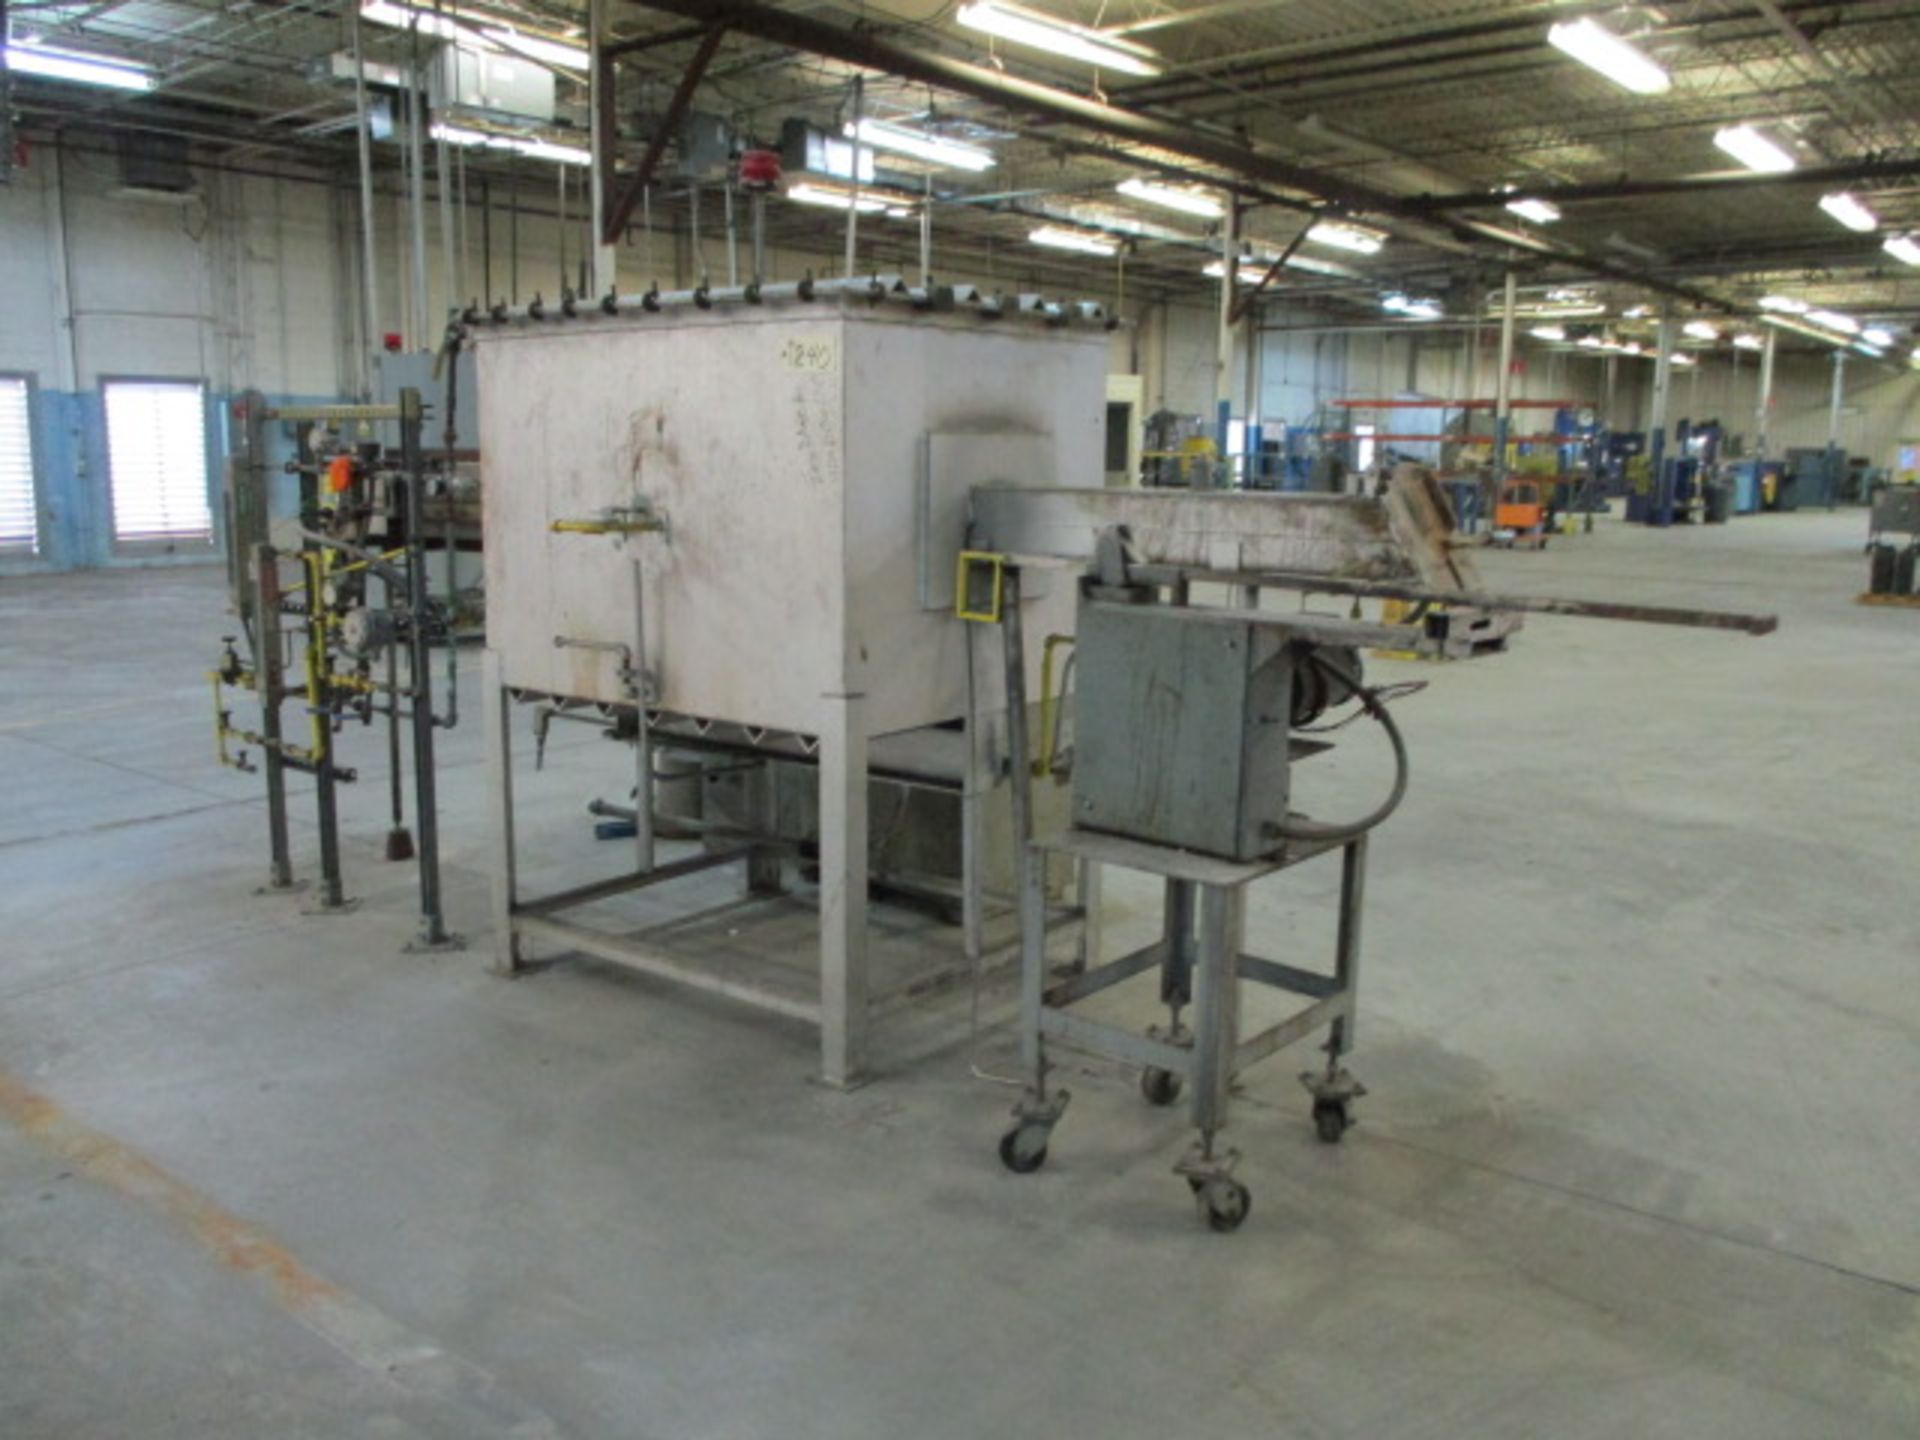 Electric Pusher Furnace with Molybdenum Heating Element, 8" W x 5" H Capacity x Approx 48" Long - Image 3 of 7